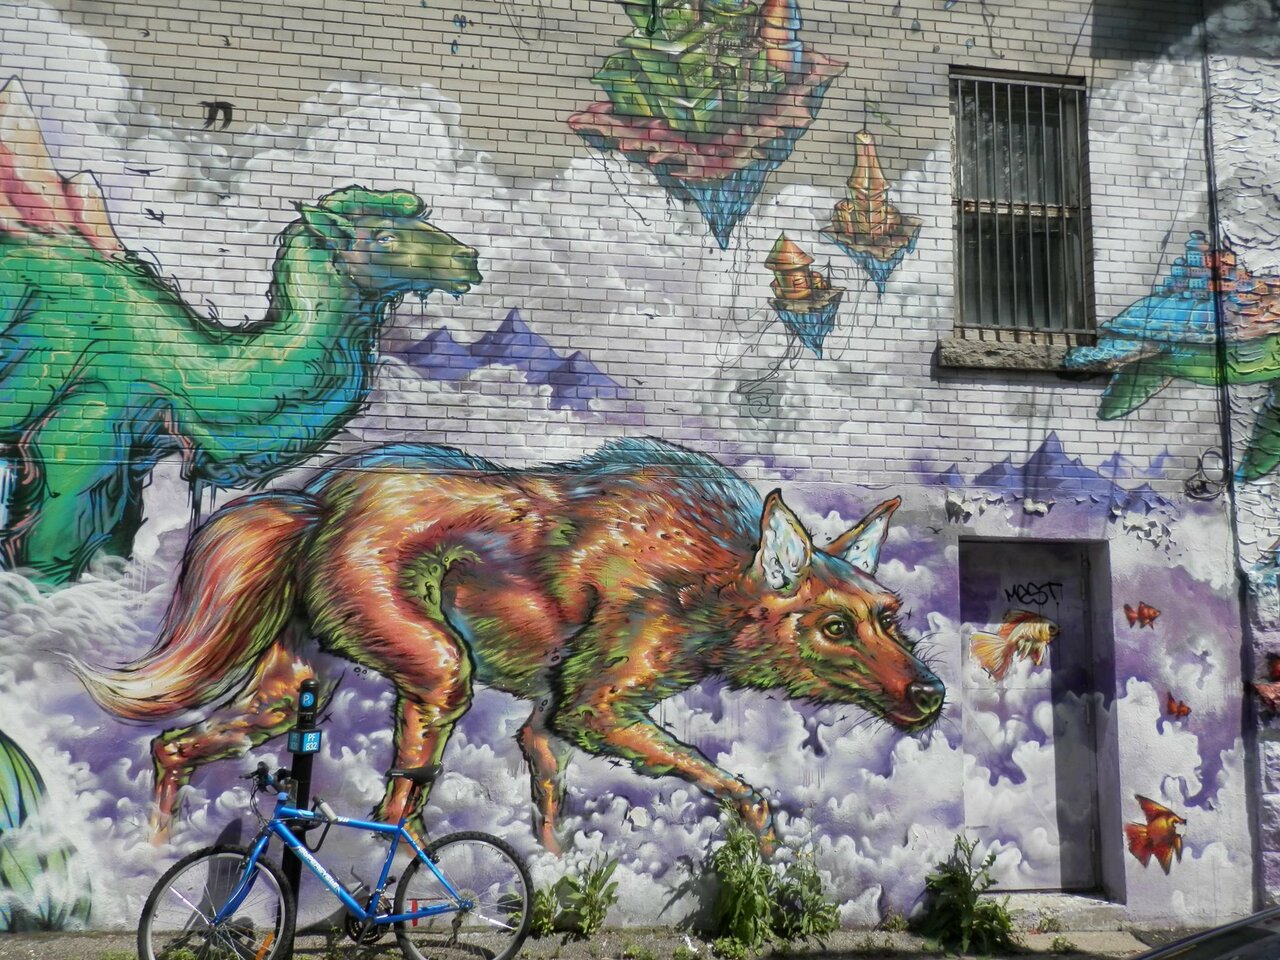 #Graffiti Large #Montreal #Streetart and fun to look at, but I'm unsure of the artist. Too big for best photograph. https://t.co/2TIEdD0AaG